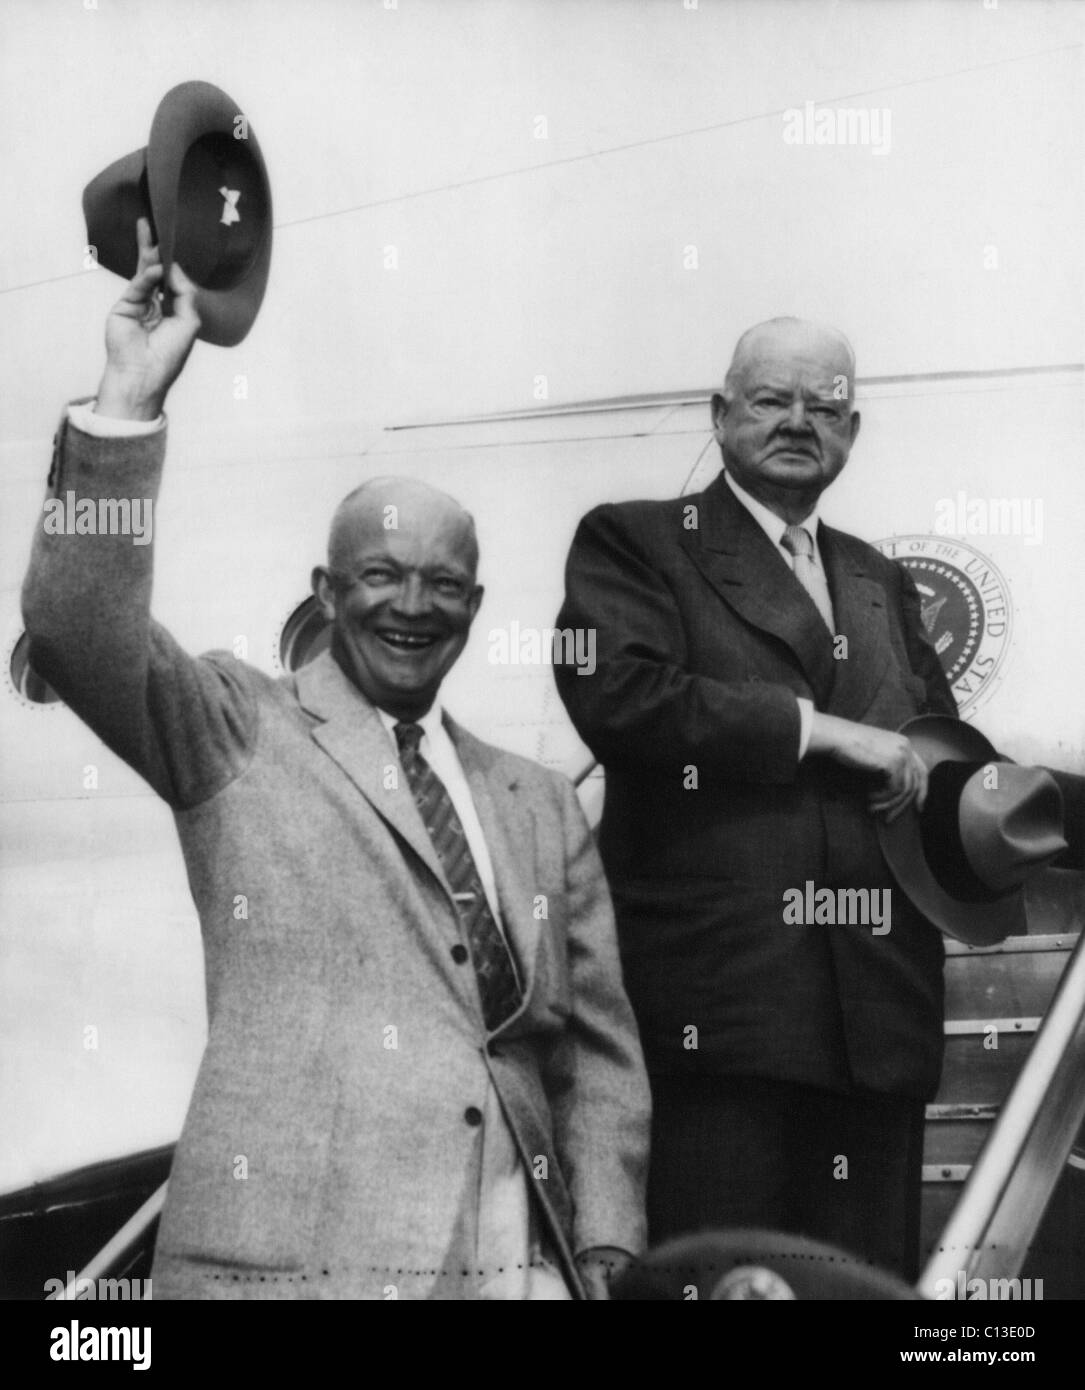 President Dwight D. Eisenhower, and Former President Herbert Hoover, heading to a fishing trip in the Rockies, August 30, 1954. Stock Photo